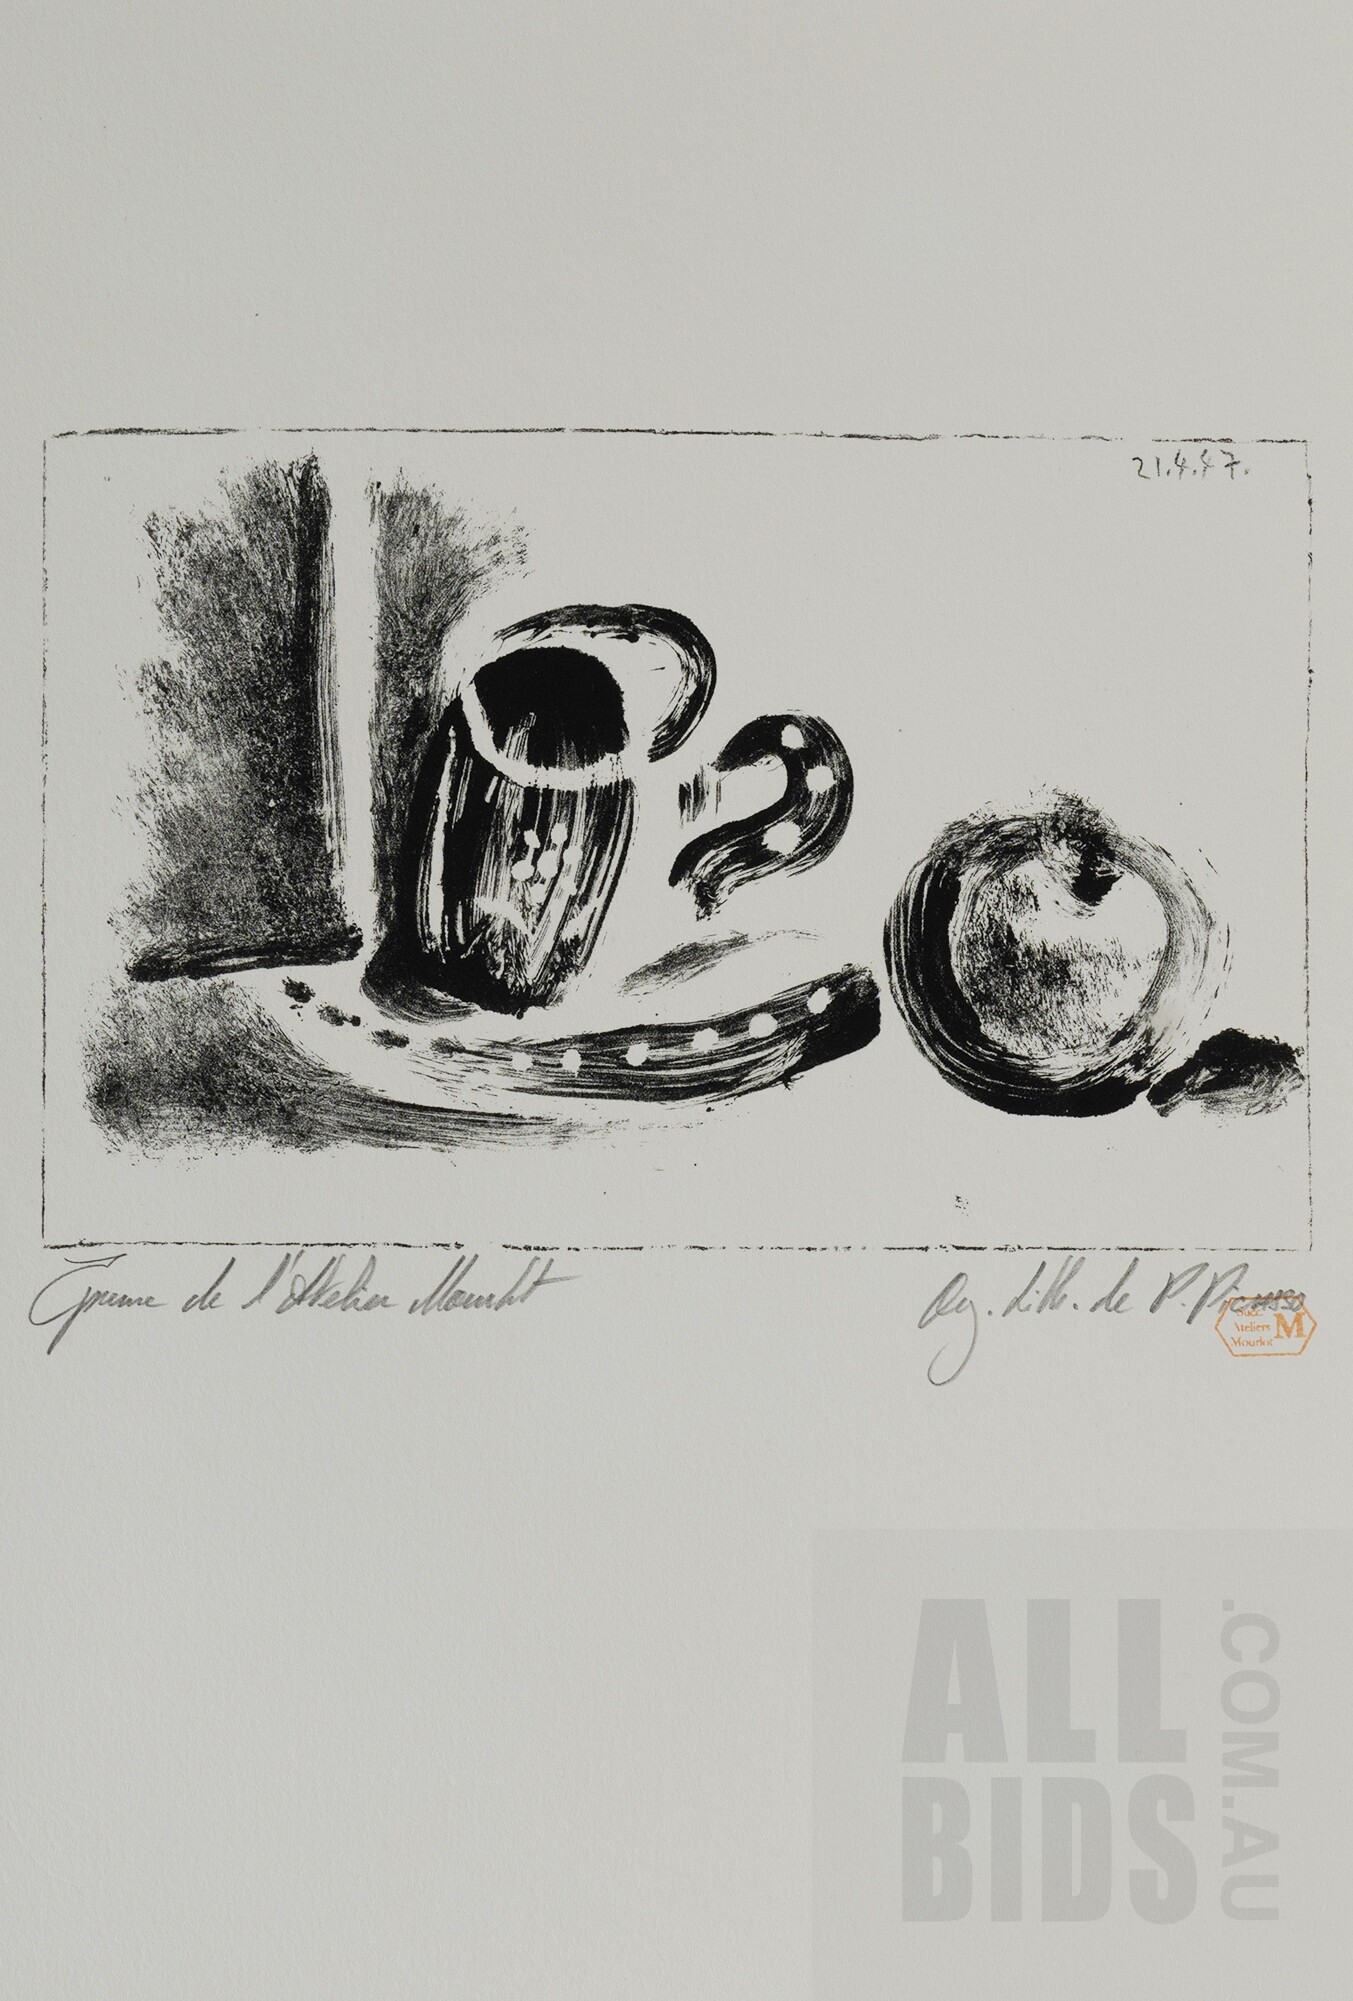 'Pablo Picasso (Spanish 1881-1973), The Cup and the Apple 1947, From Dans lAtelier de Picasso, Lithograph (un-numbered) 16x25cm (image) '